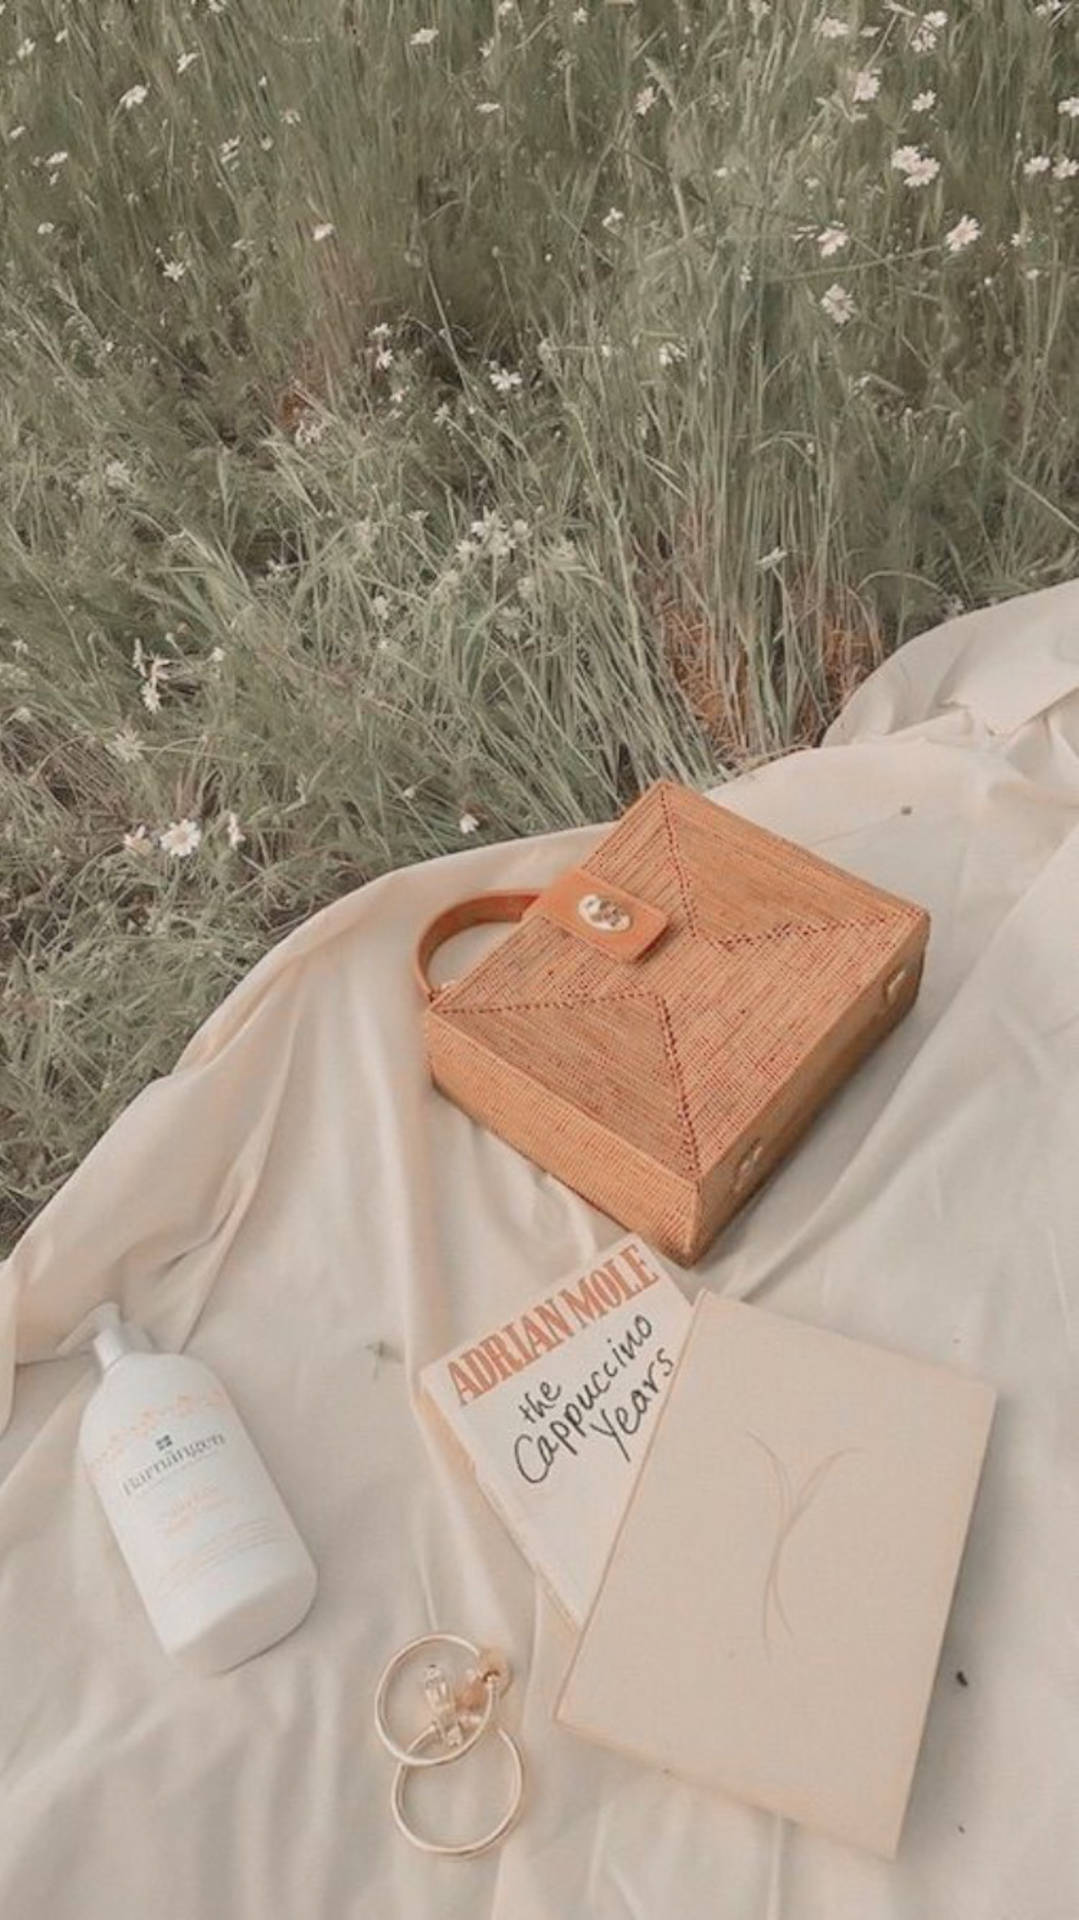 Beige Aesthetic Bag And Book Background